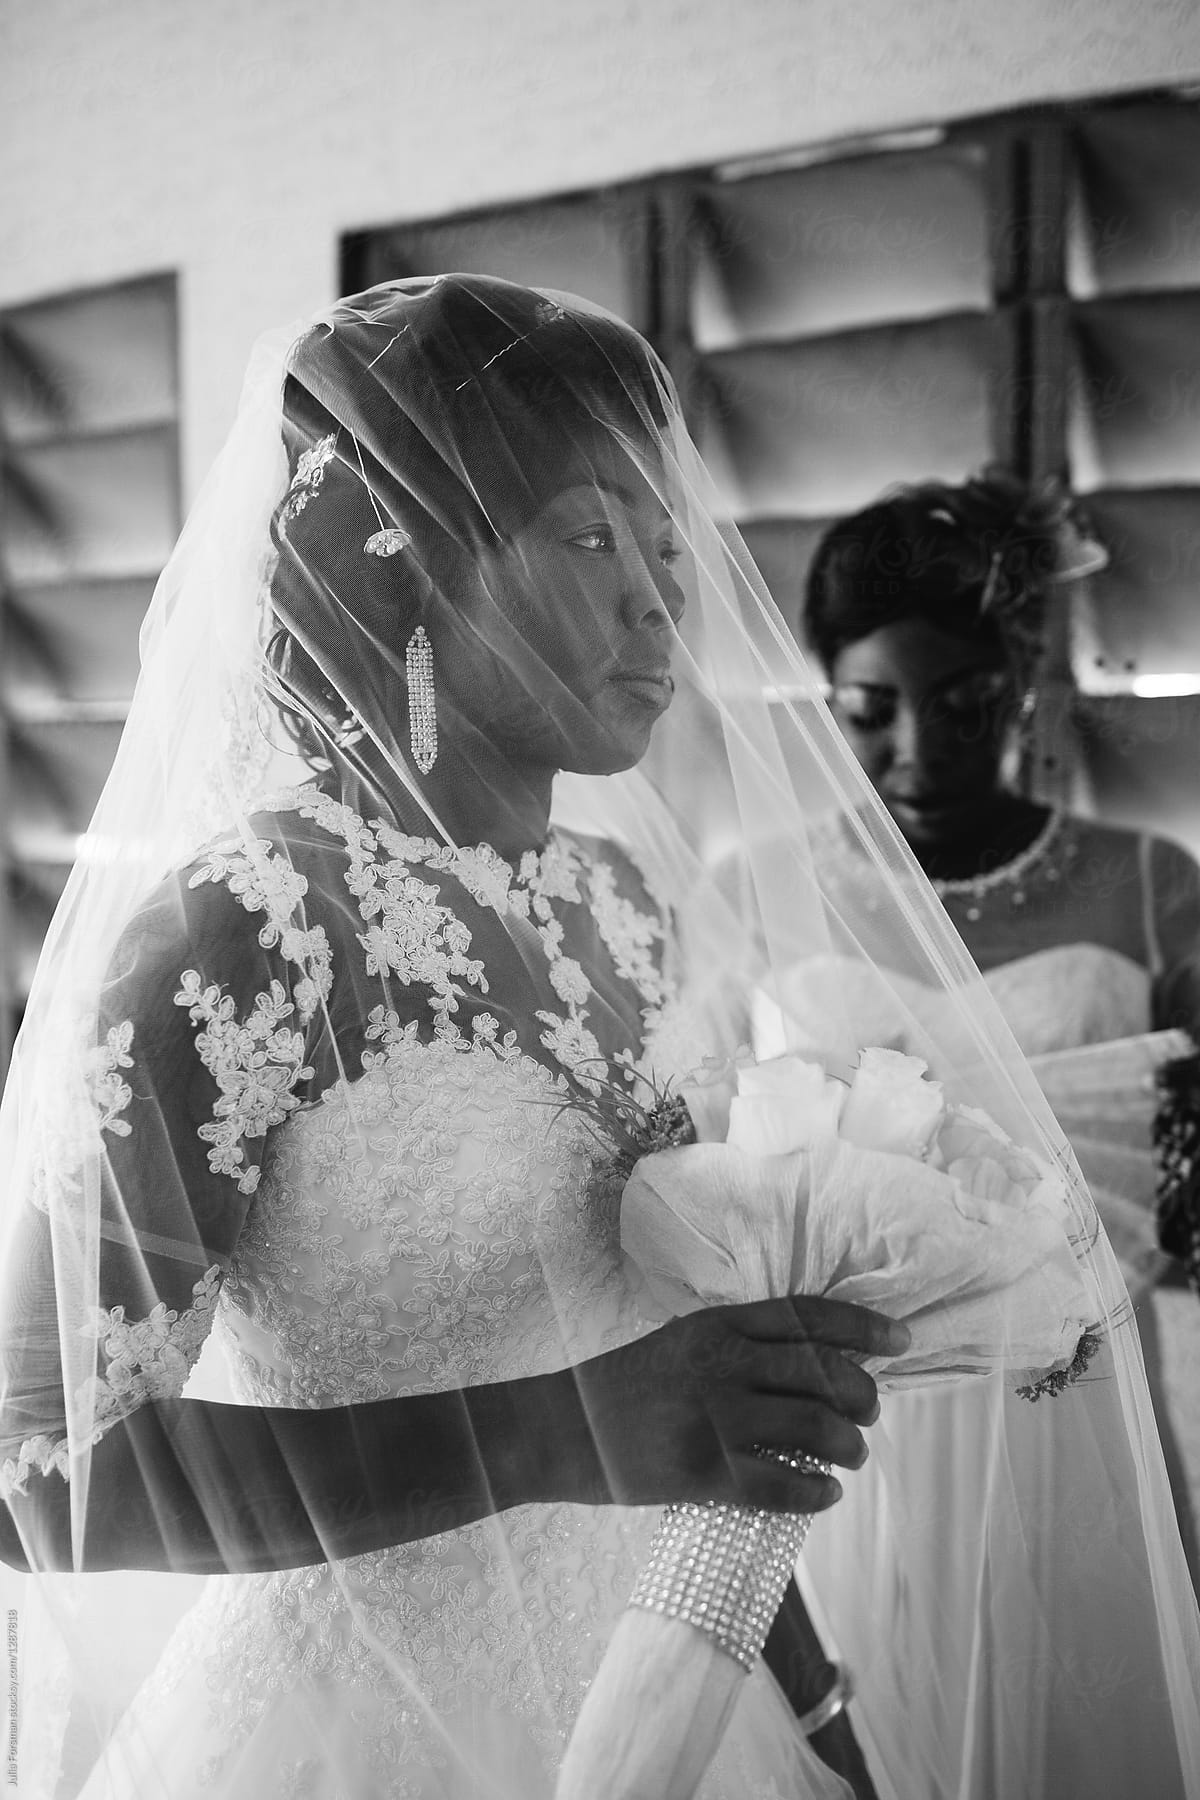 An African bride and her bridesmaid wait to enter the church.